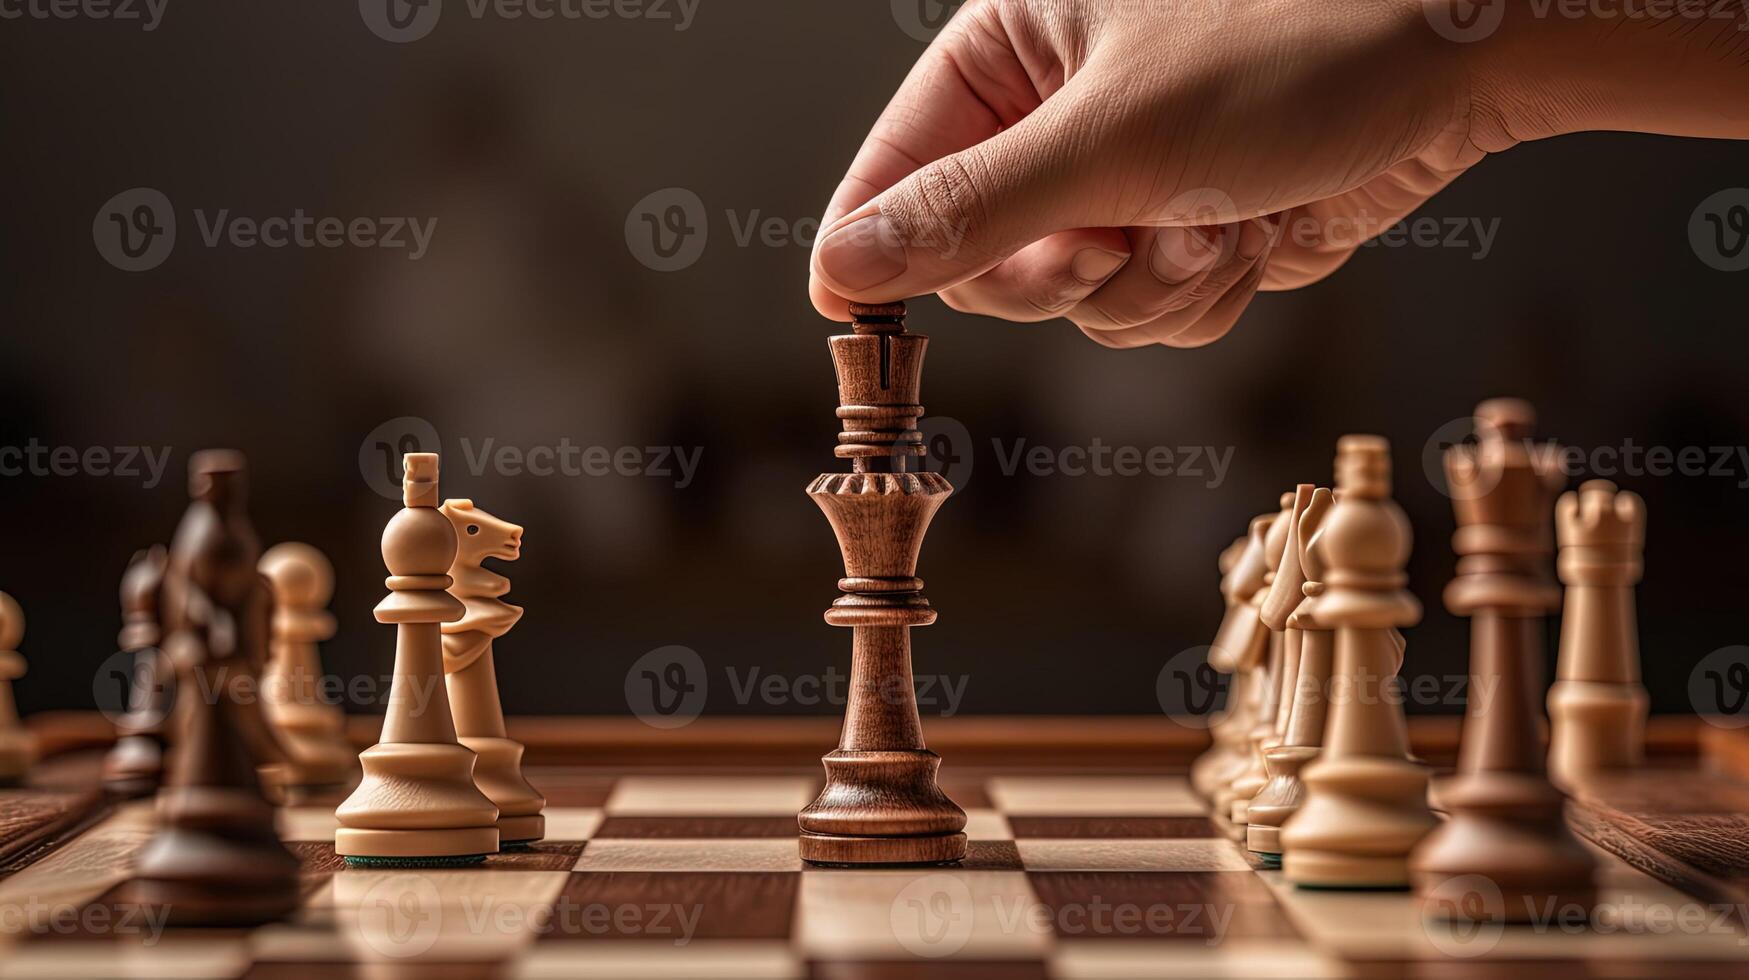 Closeup Hand of Human Taking Next Step on Chess Game. Strategy, Management or Leadership Concept. Technology. photo